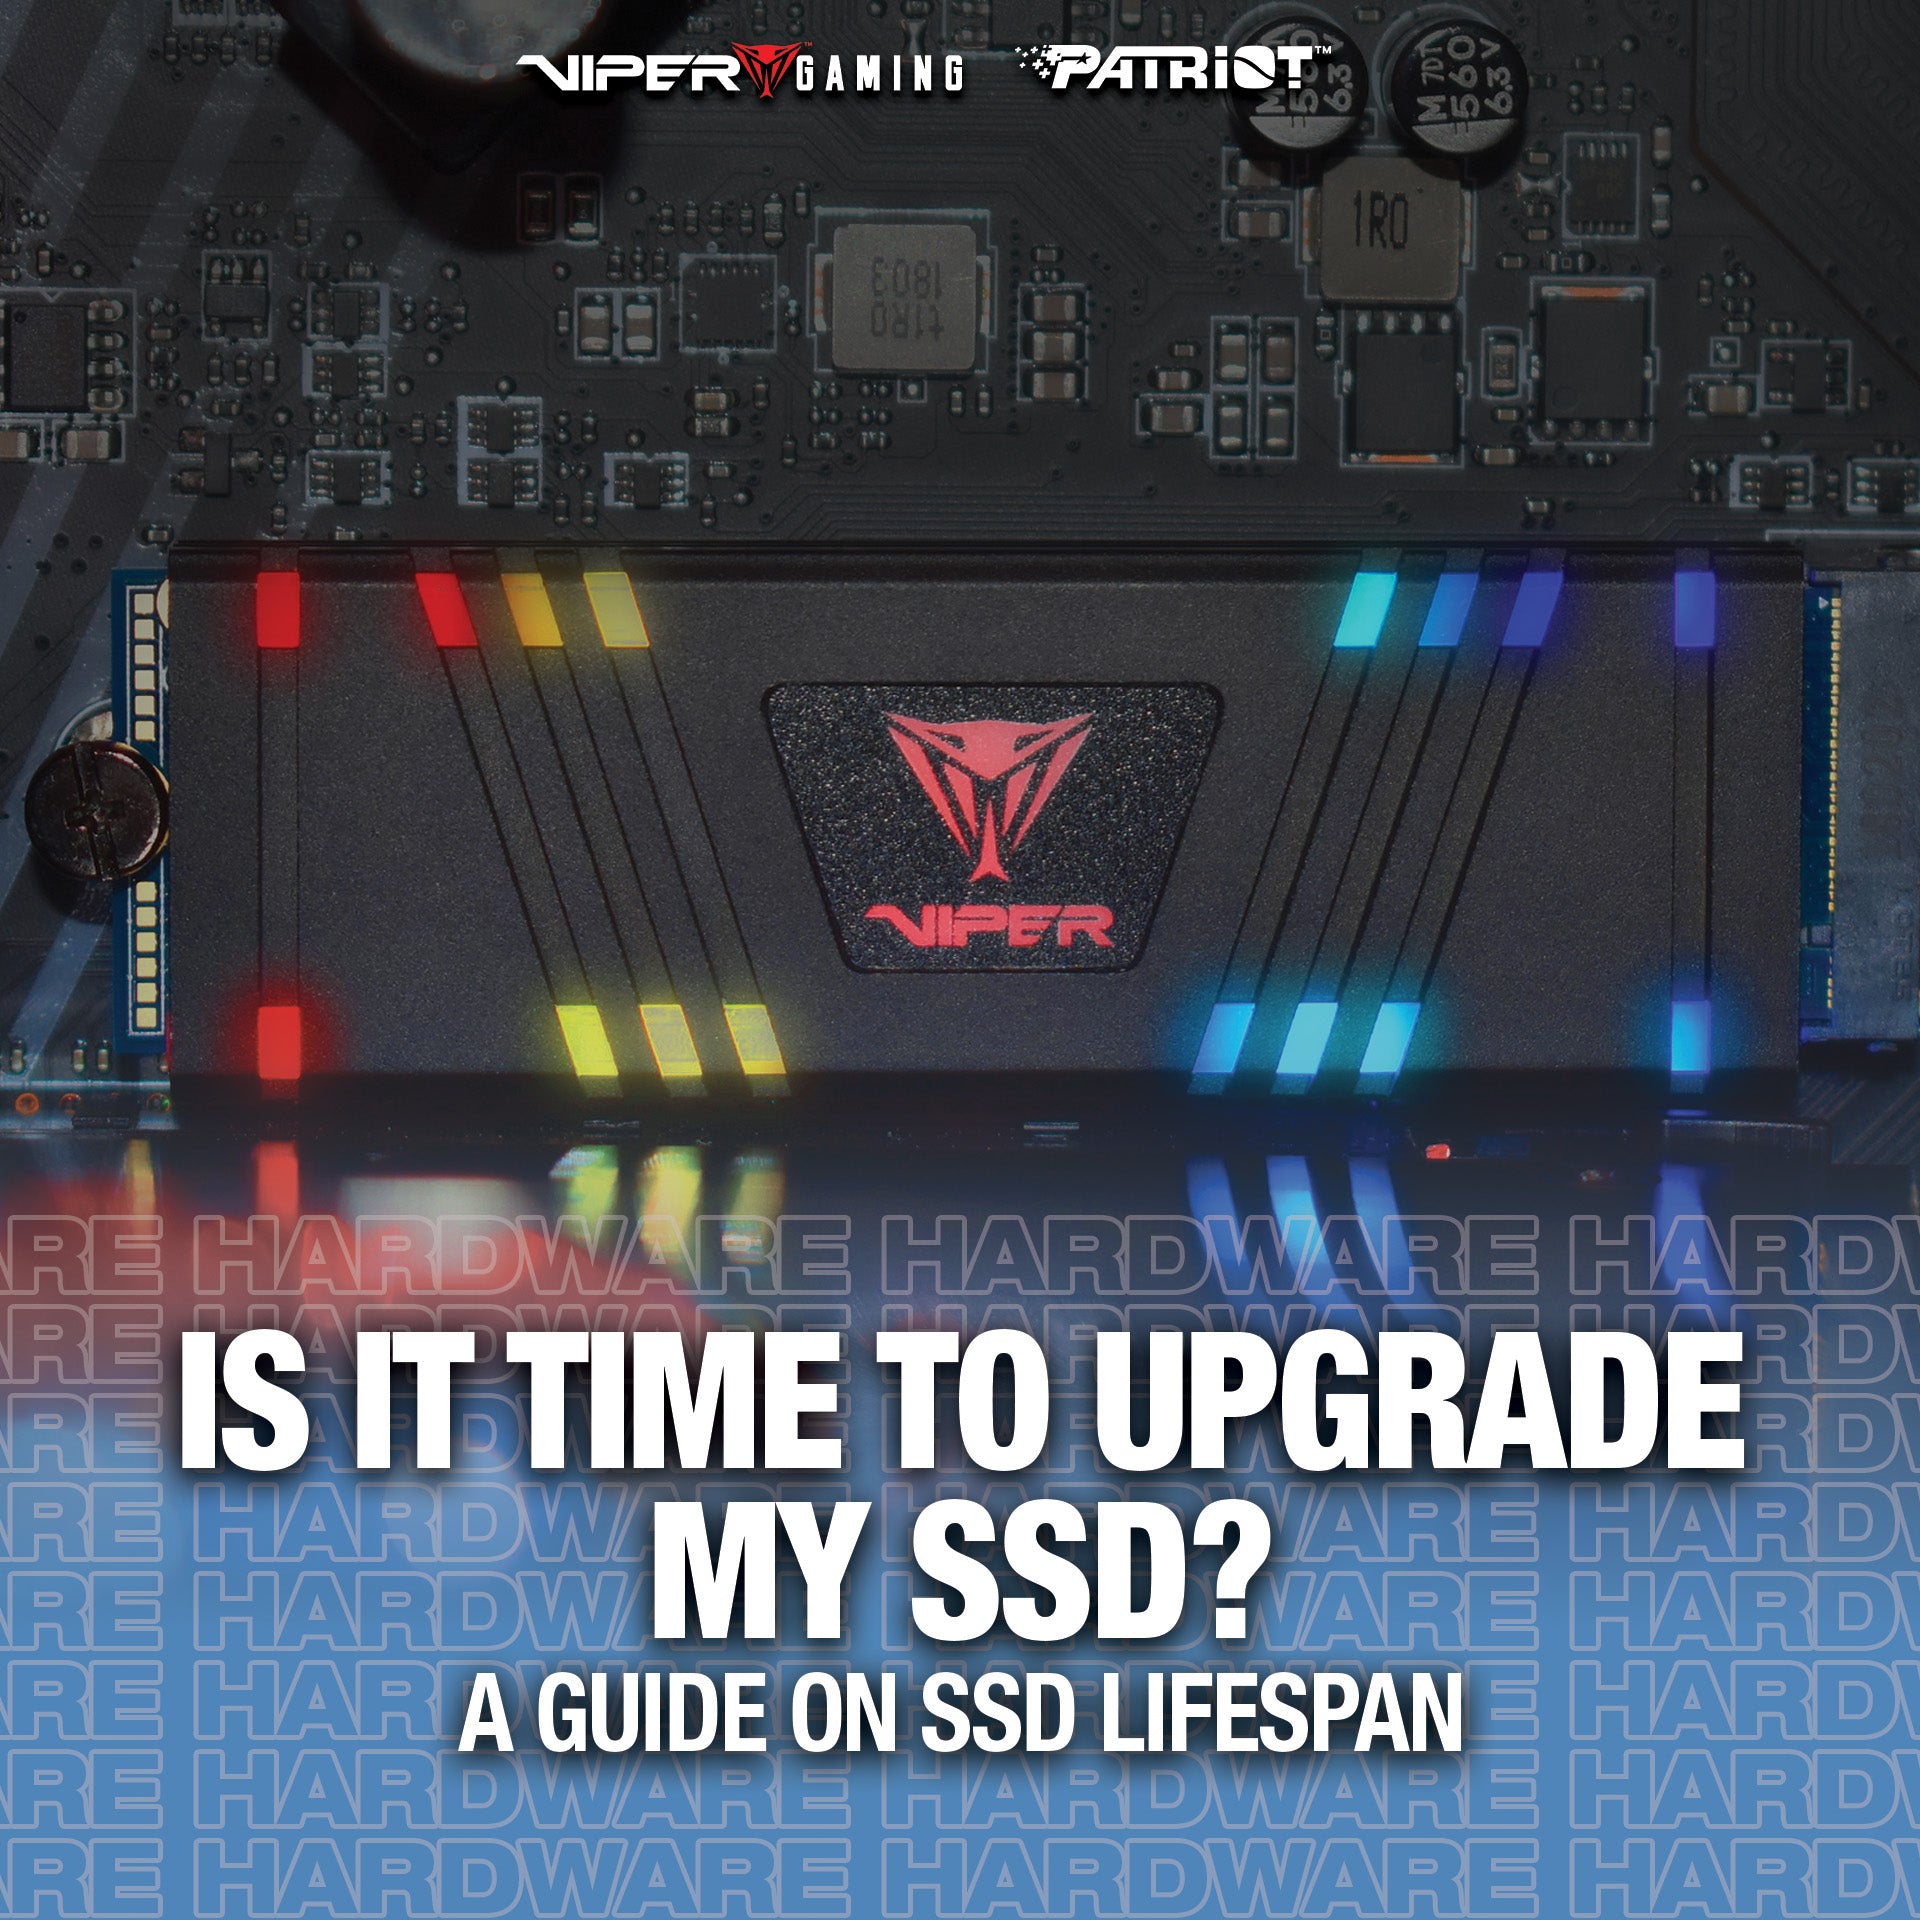 Personligt Conform anden Is it Time to Upgrade my SSD? A Patriot Viper Guide to SSDs and Lifesp